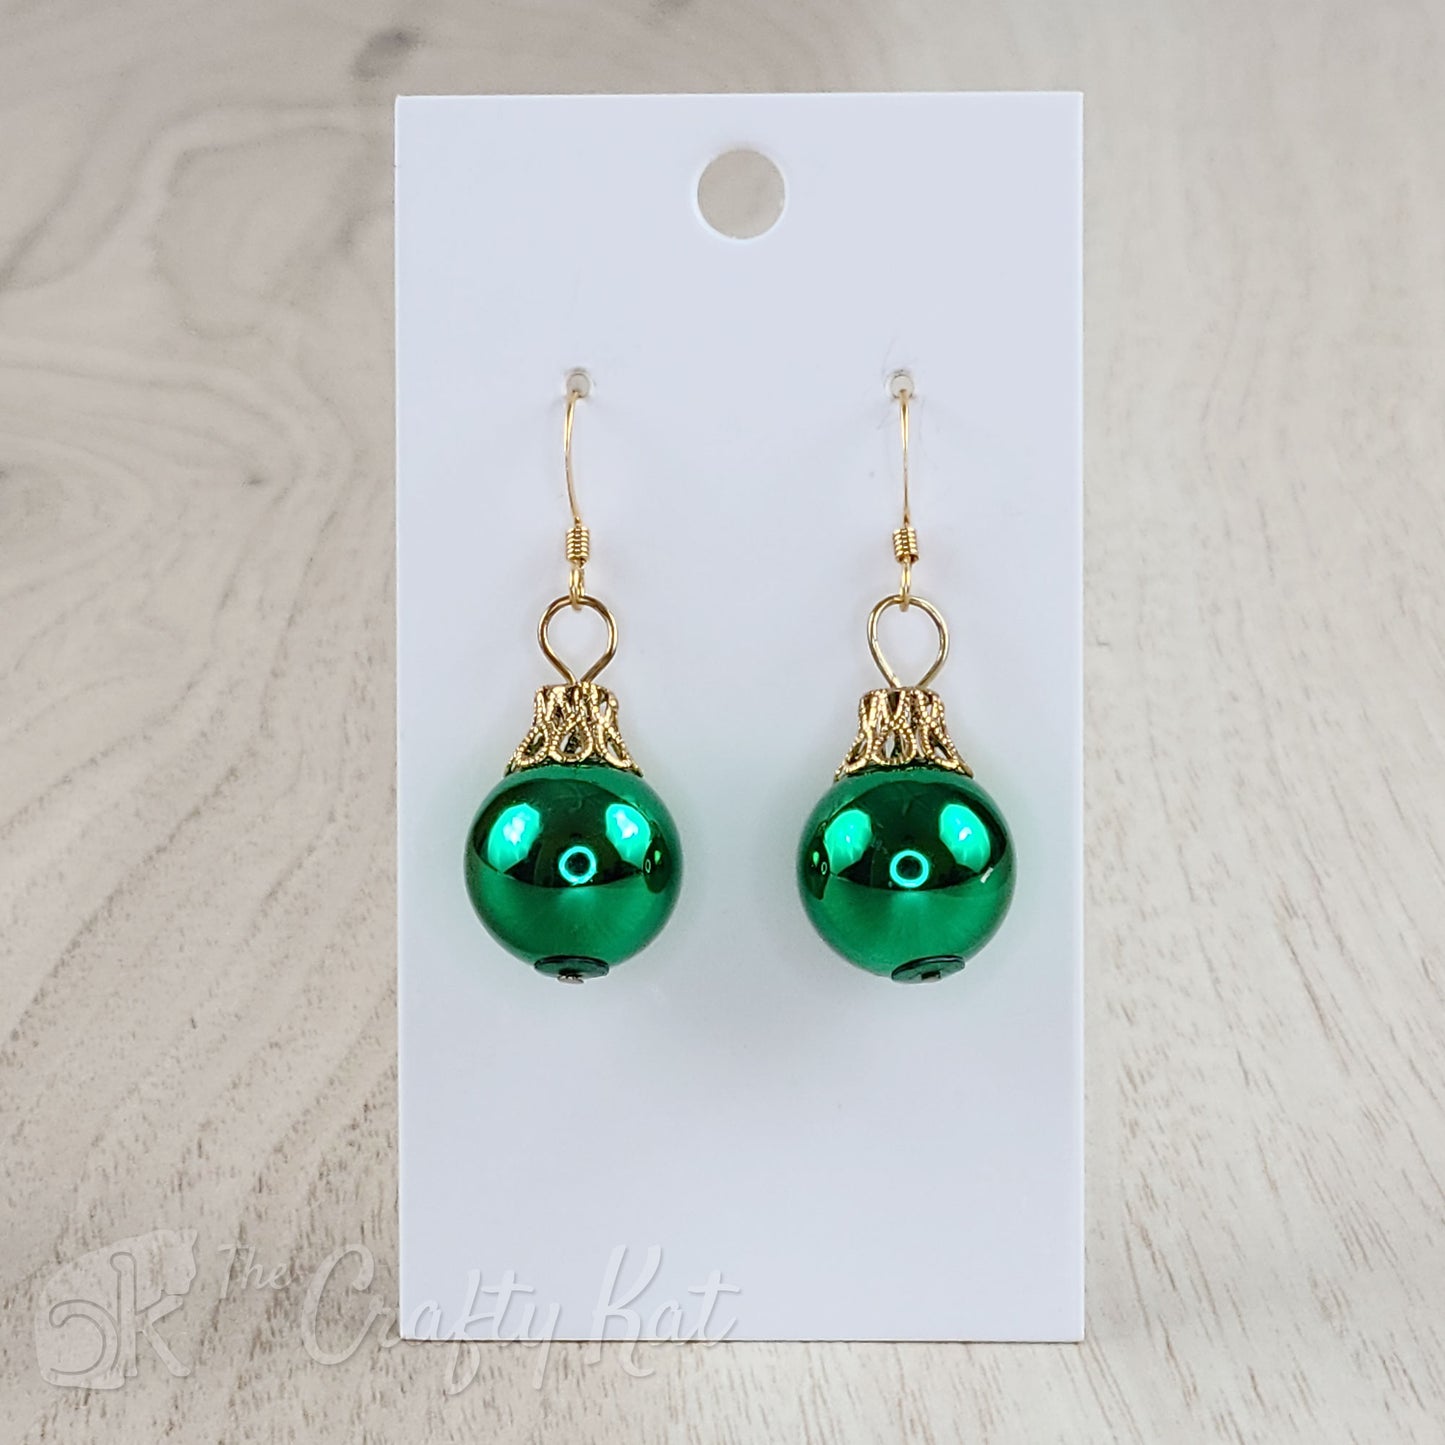 Each earring is a green globe with a gold-plated filigree cap, giving each the appearance of a classic holiday tree ornament.